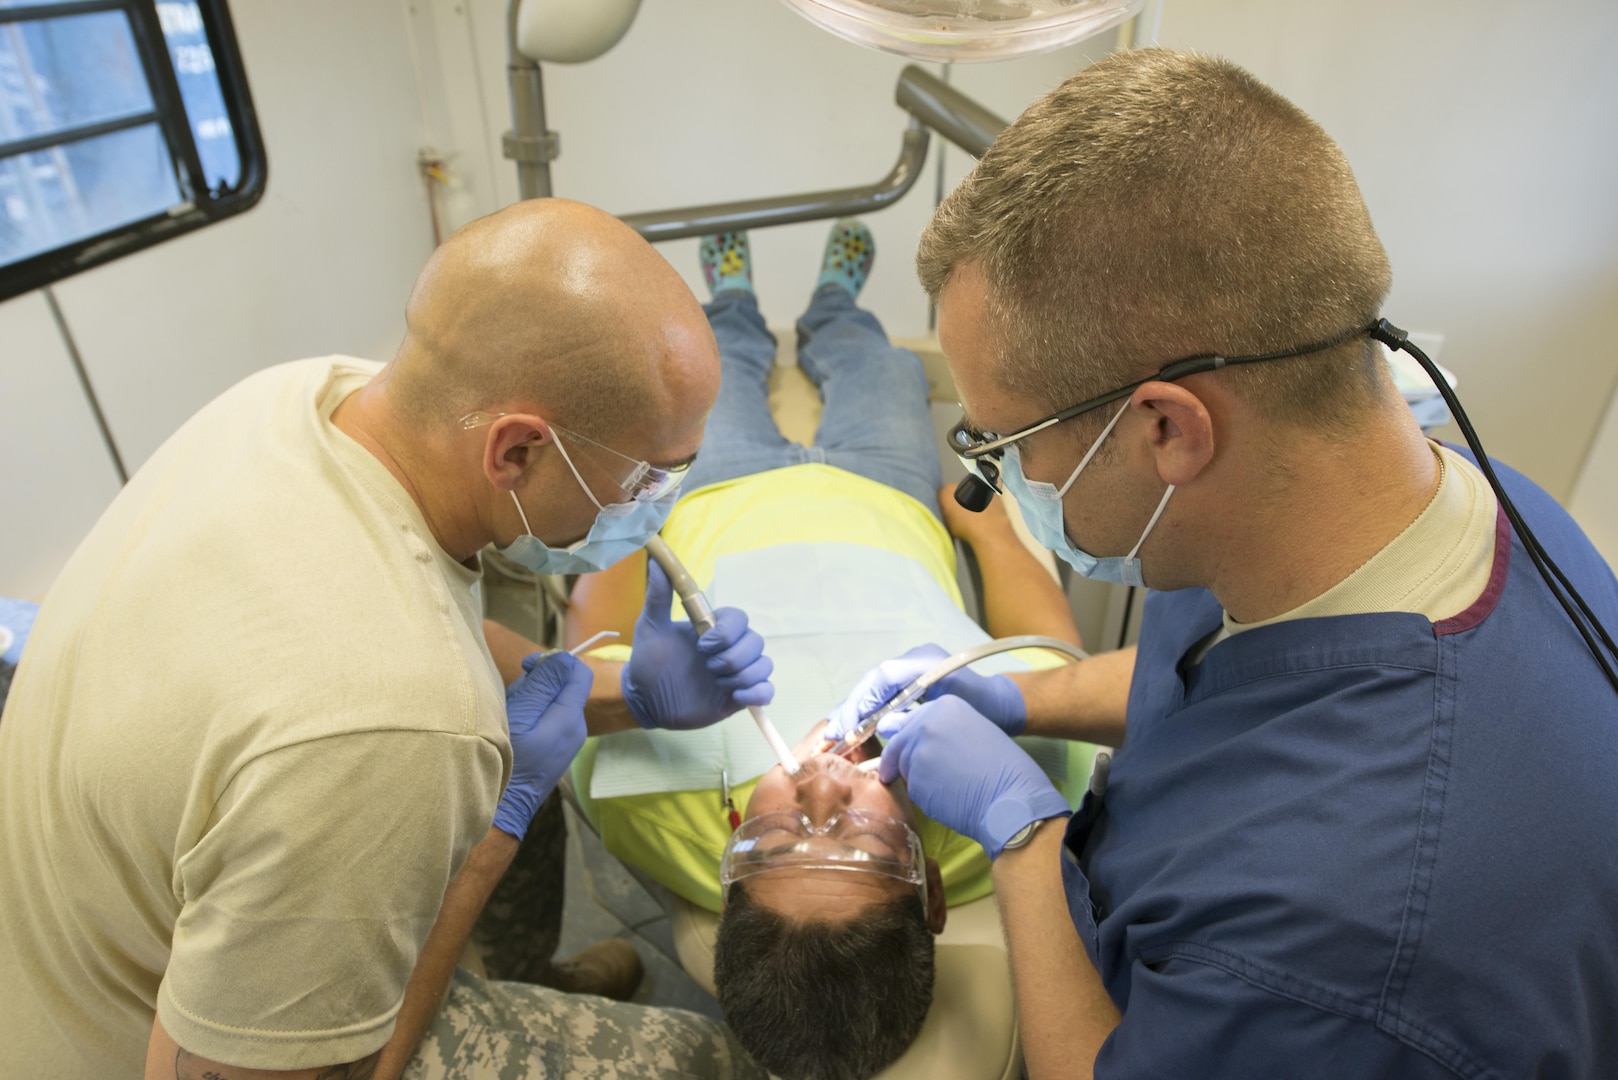 Capt. Mark Burns (right) and Sgt. Justin Miles (left), both Reserve Soldiers with the 7226th Medical Support Unit, perform a dental procedure on Victor Garcia inside a mobile dental clinic parked next to the El Cenizo Community Center June 20. Nearly 200 Soldiers and five Navy opticians participated in an Innovative Readiness Training mission to provide free medical care and other services to economically distressed colonias in the Laredo area near the Texas-Mexico border.